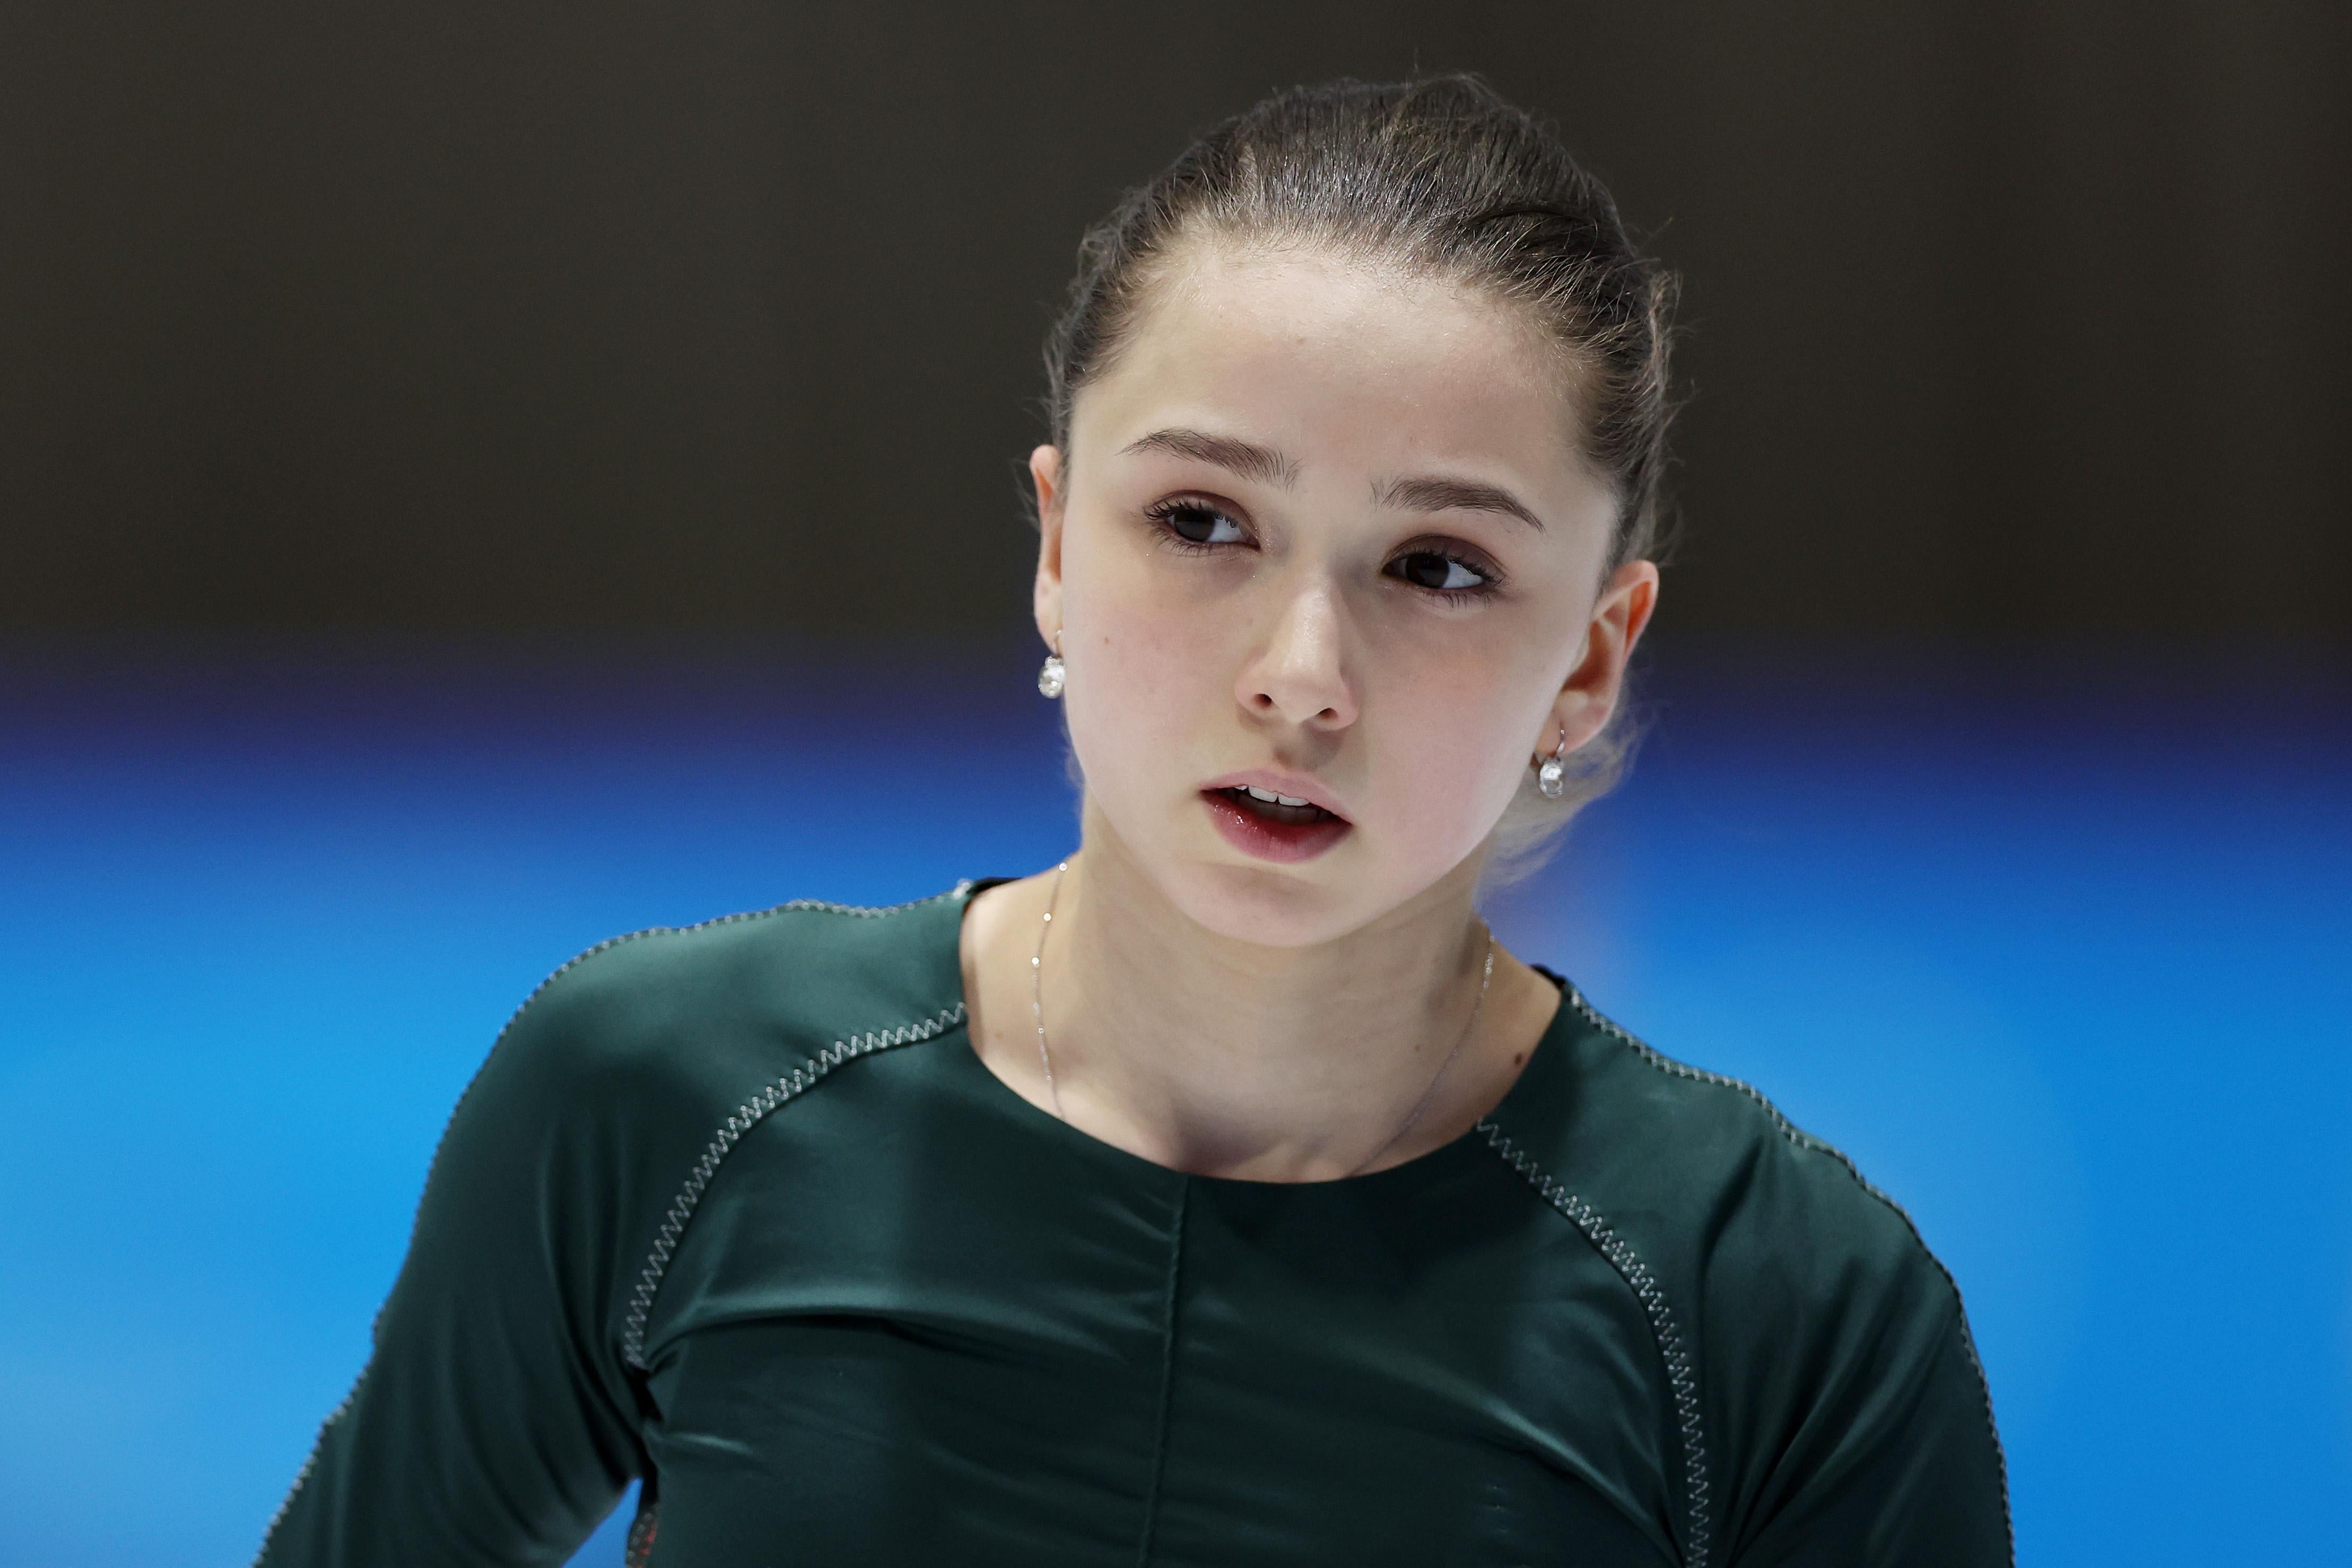 Valieva looking concerned as she skates